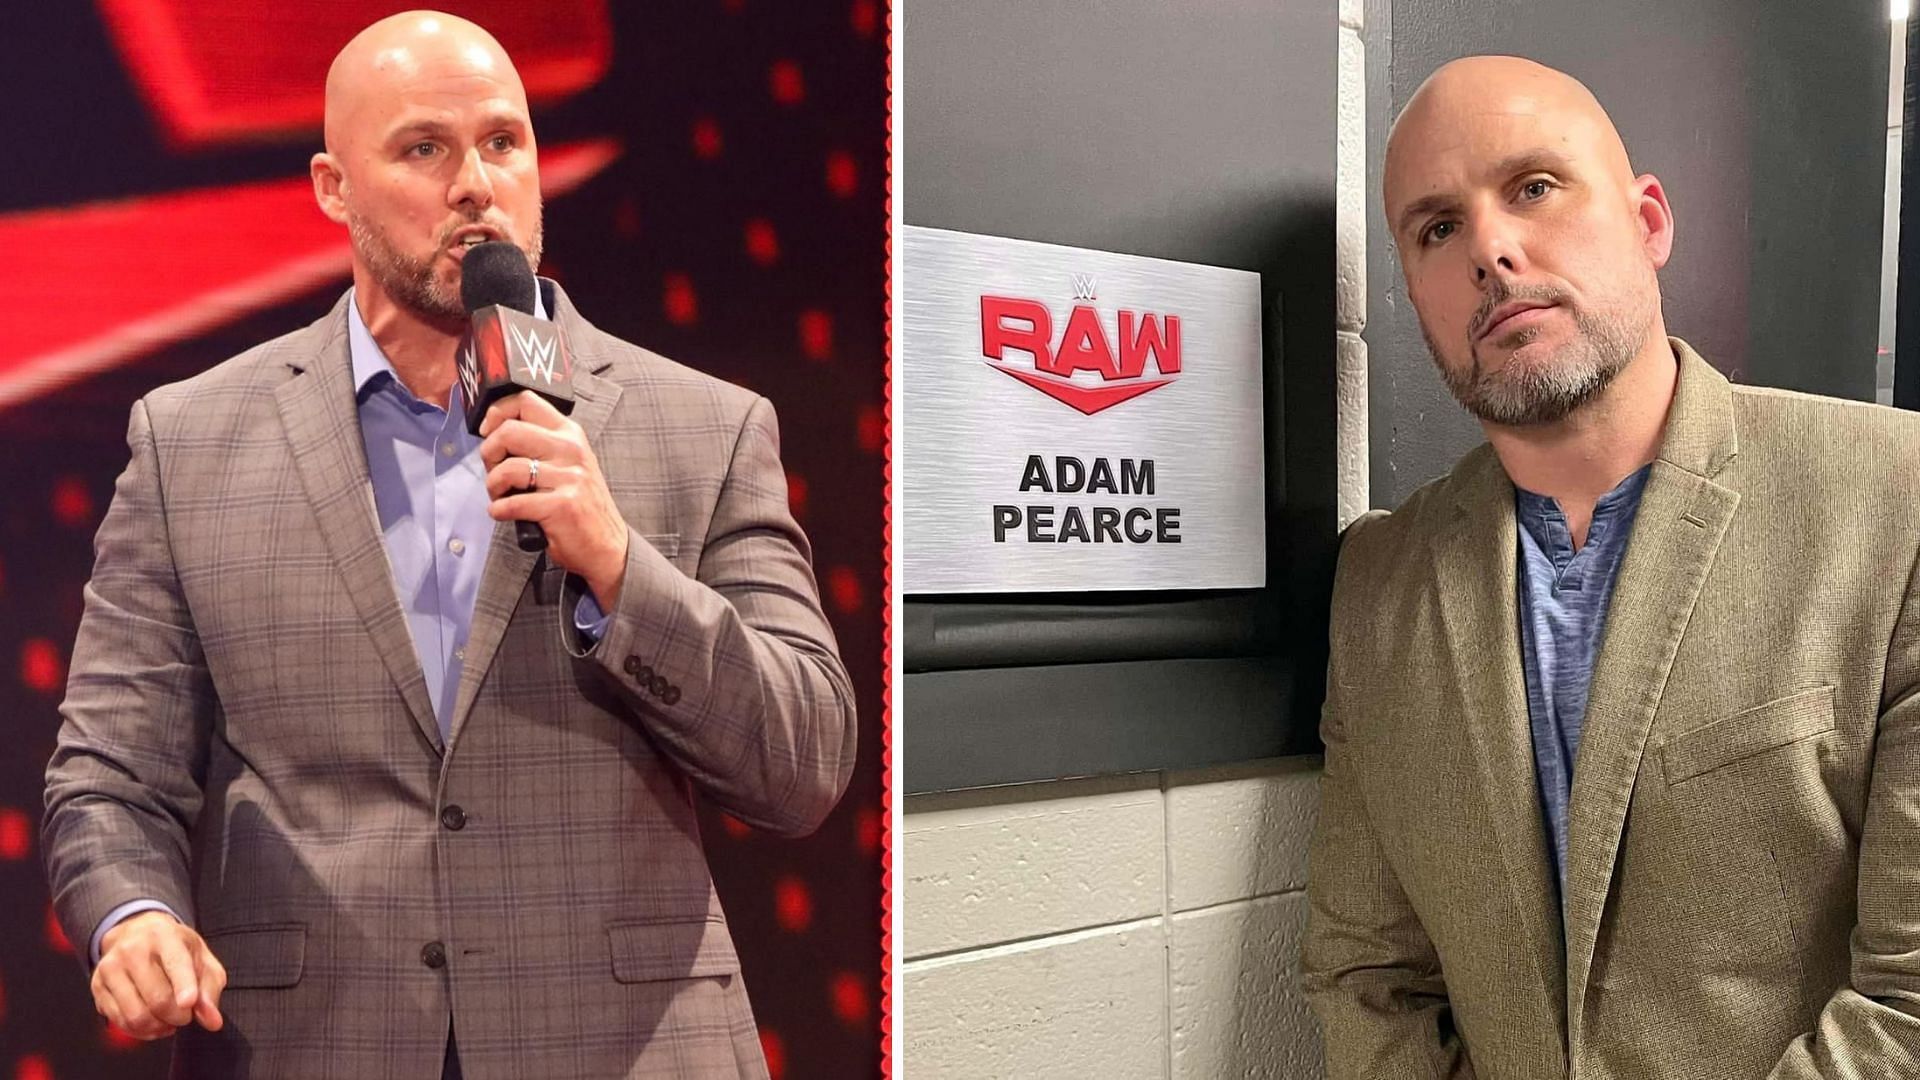 Pearce currently serves as the GM for RAW.